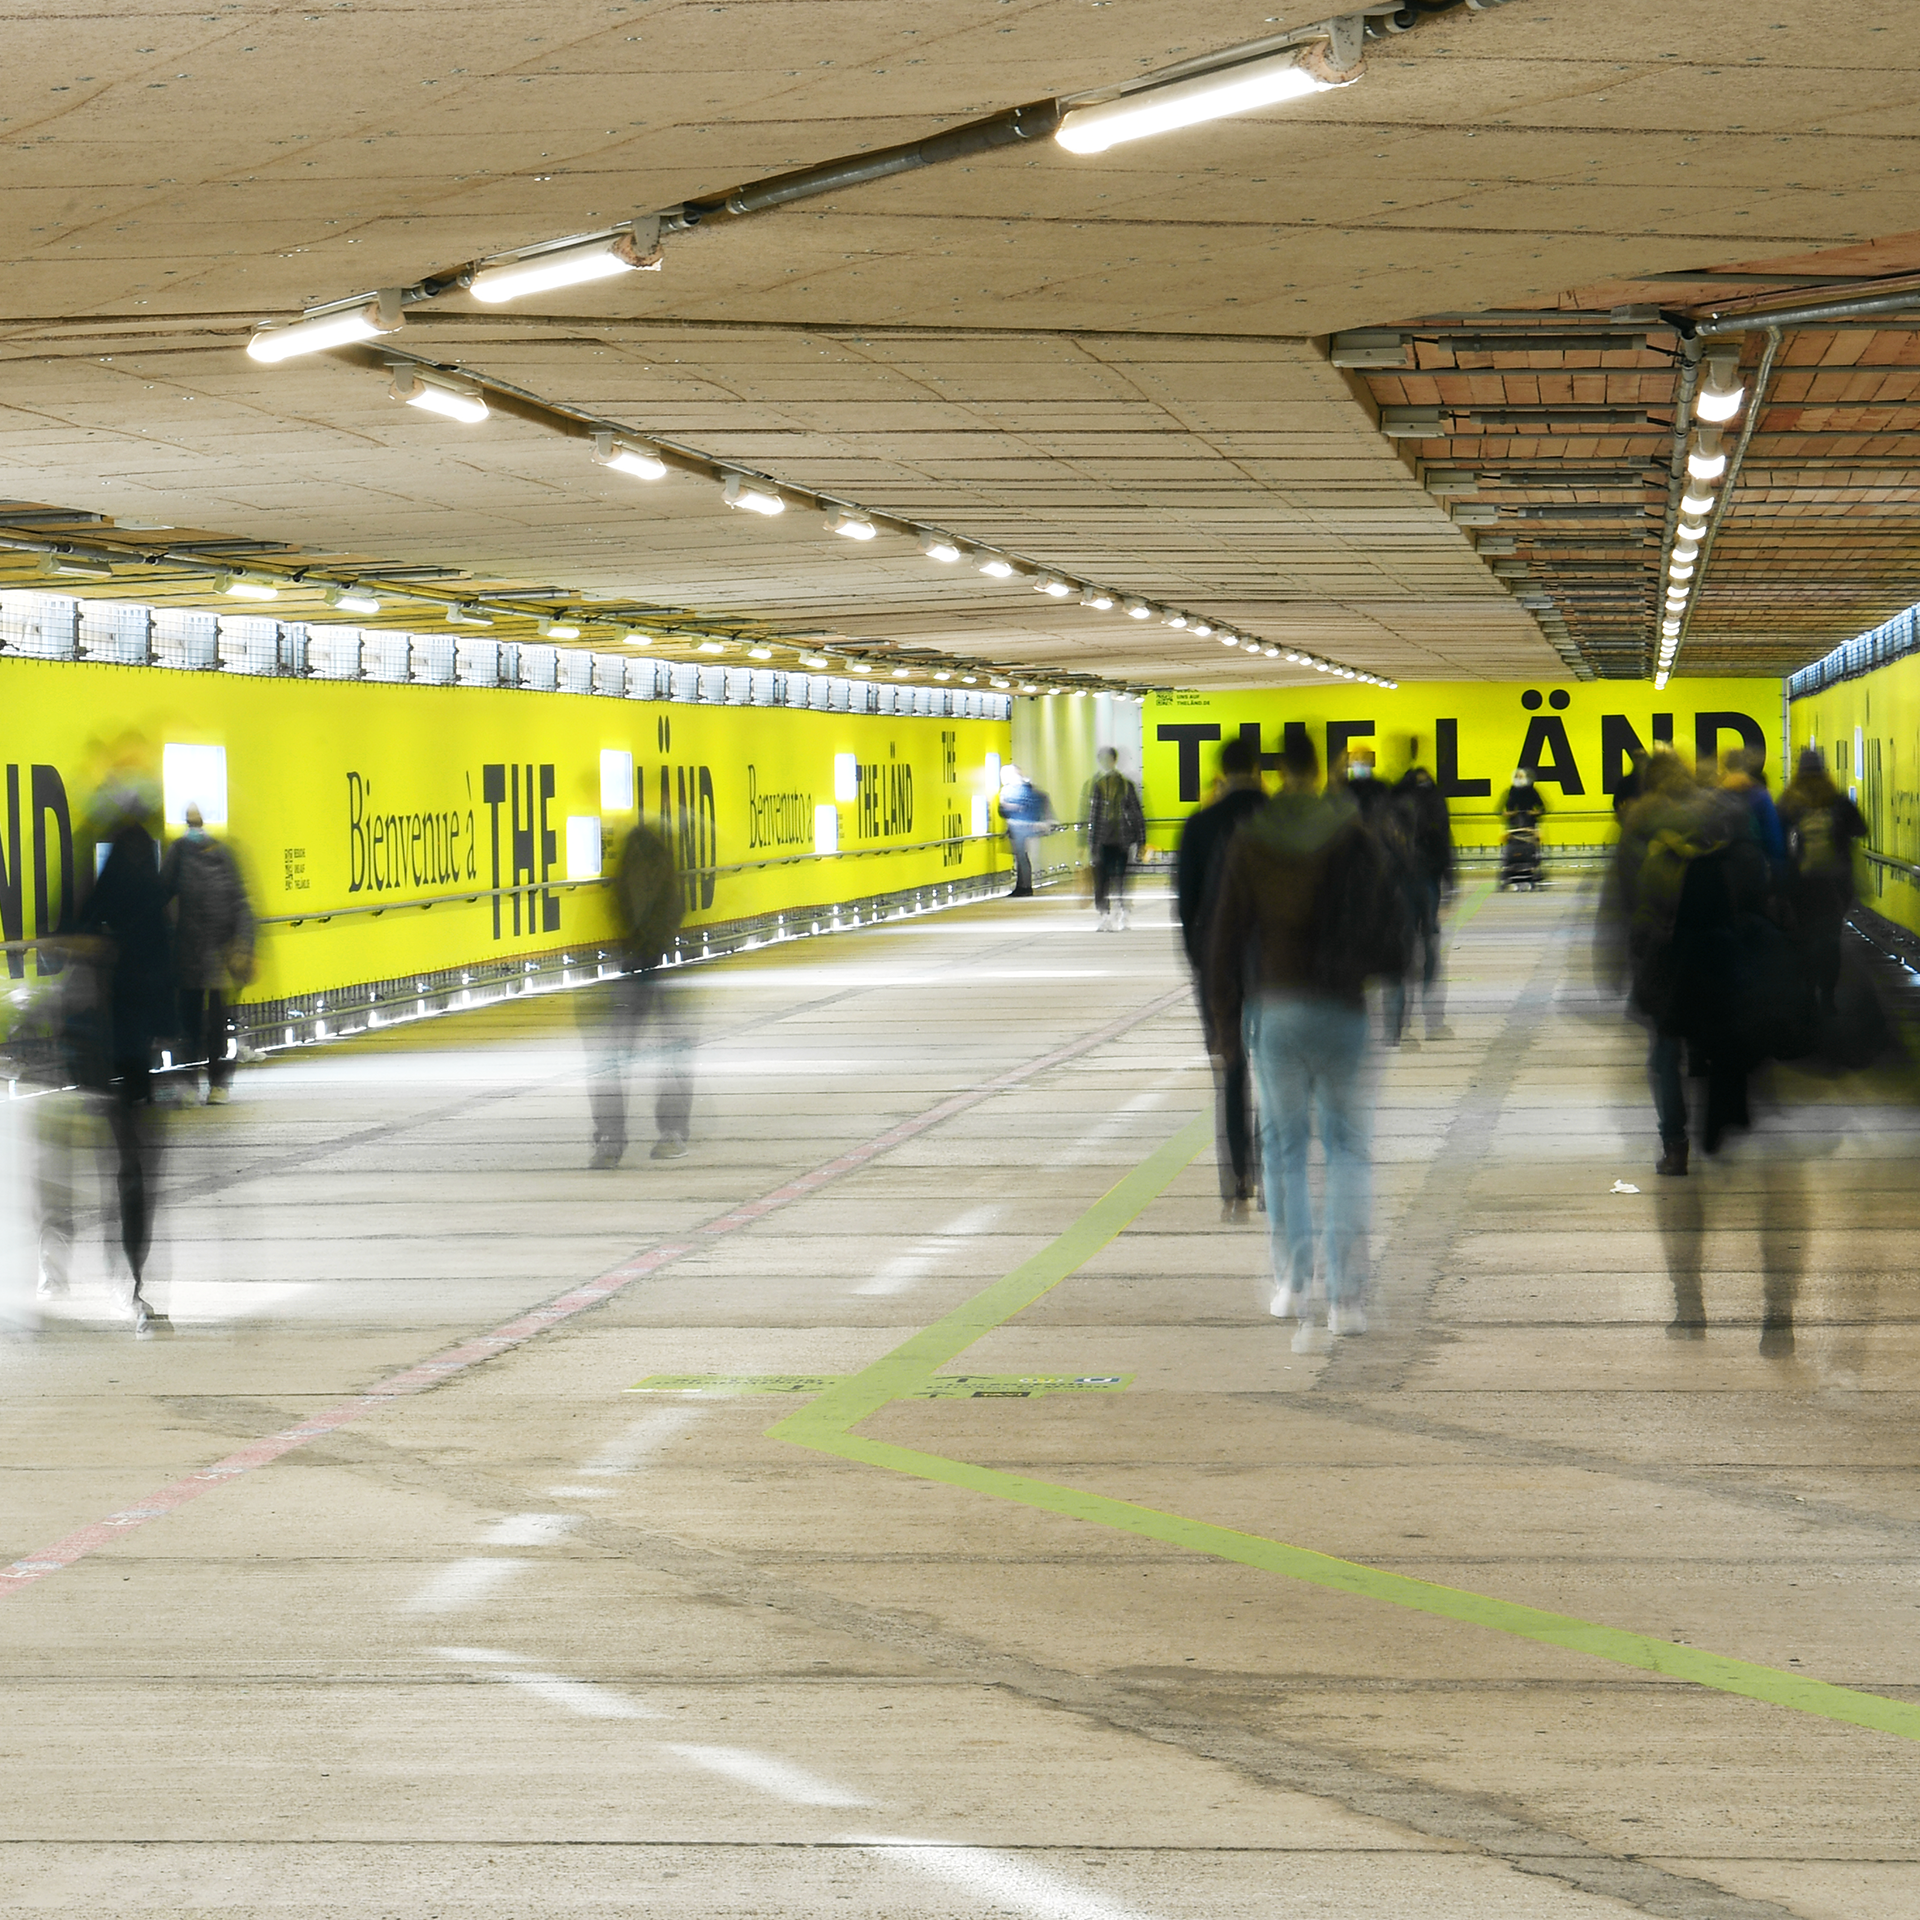 about 10-15 people walk through a kind of illuminated tunnel. the walls are placarded with the branding of The Länd.